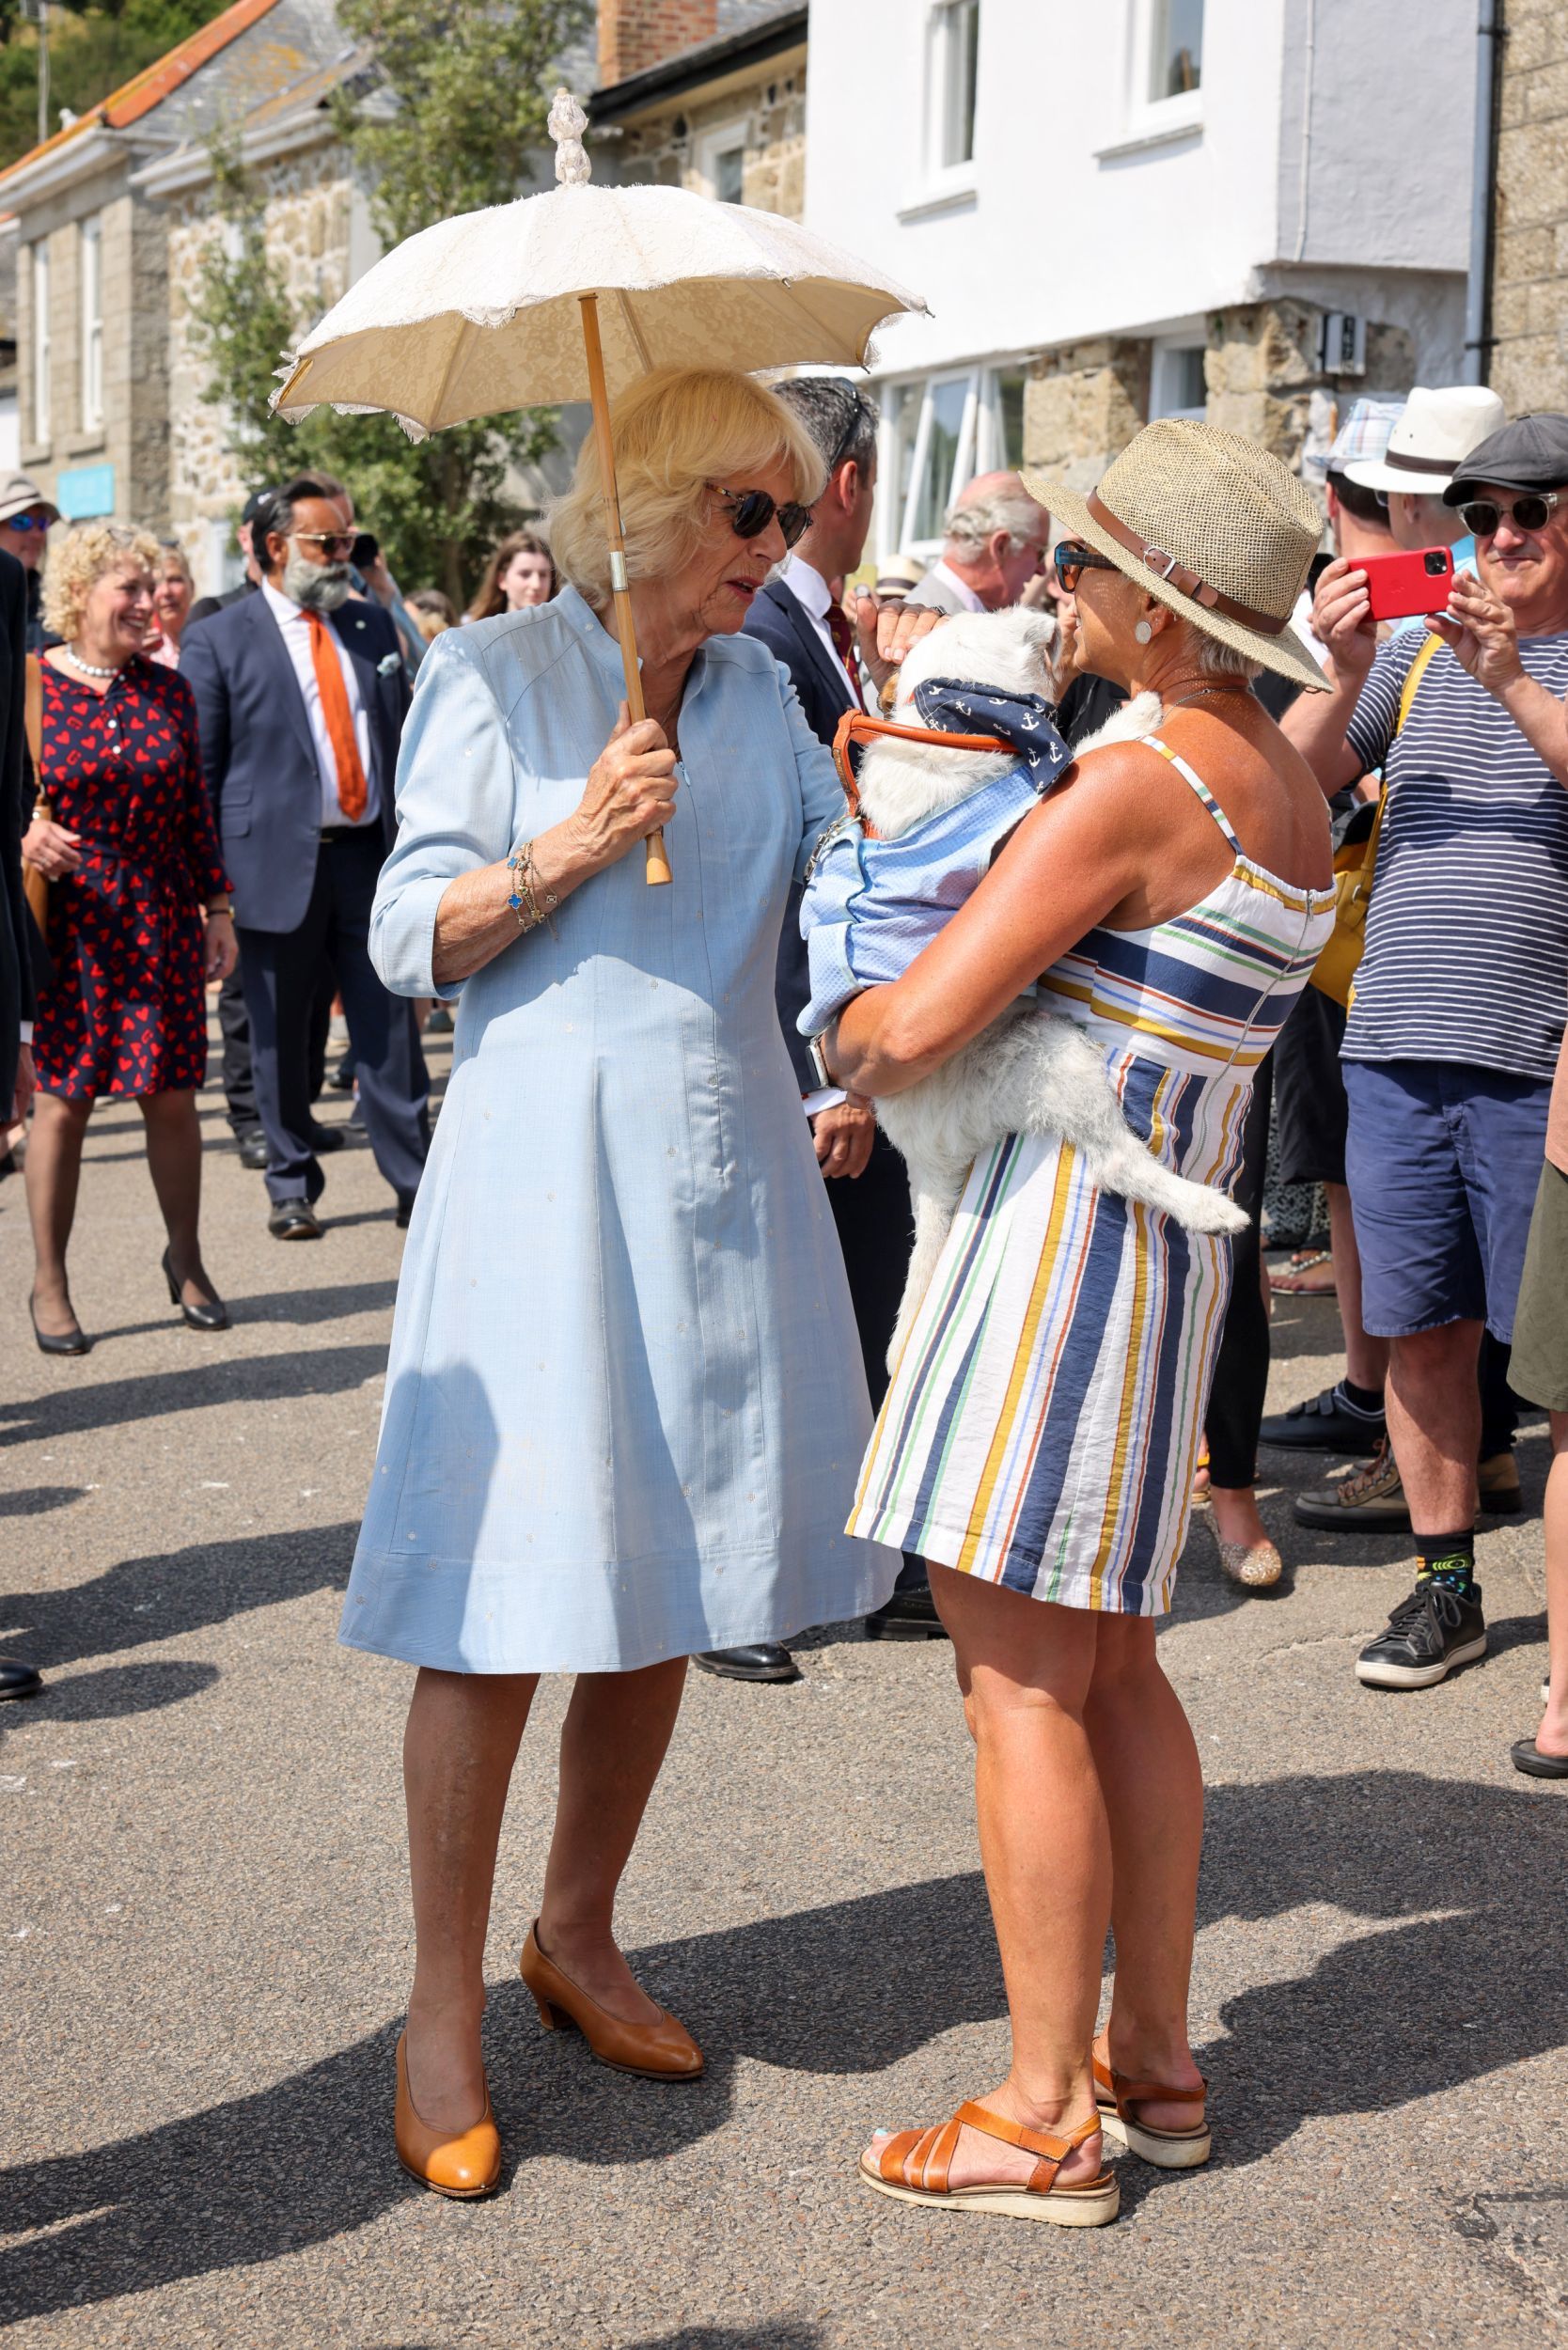 The Duchess of Cornwall kept herself covered with a parasol in the warm sunshine Picture: Greg Martin / Cornwall Live